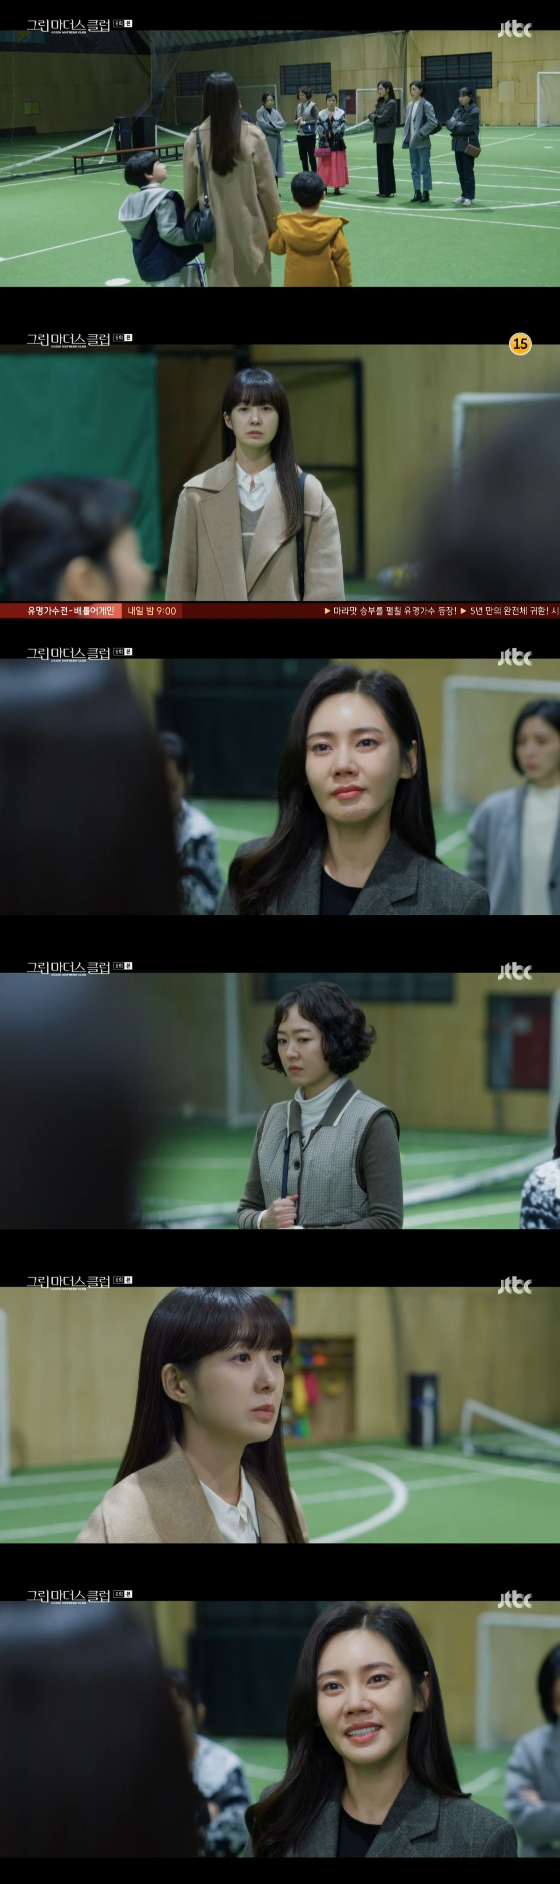 In JTBCs Wednesday-Thursday evening drama Green Sams Club, Lee Eun-pyo was surrounded by parents including Chang Chun-hee (Choo Ja-hyun) and Park Yun-ju (Resident Kyung).Lee Eun-pyo said, Why are you doing this? Where are all the children? Byun Chun-hee said, I did not come because I thought I should talk about what children should not hear today.One of the parents said, The Dong-seok is embarrassed to put it in his mouth.Another parent said, Dong Seok took Yubin and Suin to the empty classroom of the institute and showed them where they should not show. Lee Eun-pyo said, What is that?I can not do that, the parents said, thats all. You should not go anywhere. Blackmail – Cinémix Par Chloé.I am afraid to send school now. I do not need to say anything, and what I want is that your family wants to be an In-N-Out Burger in this community. I do not want to see anything about apology.Lee Eun-pyo said, Im really the first to hear it. I can not believe it. Lee Eun-pyo looked at Park Yunju and said, Is it true?Is it Suin? Park Yun-ju stared at Lee Eun-pyo without saying anything. Get in the room, Mom. Yeah. I understand parents who dont want to believe.If your child has made such a big mistake, it is the order for your parents to kneel and apologize. Lee Eun-pyo said, I am really sorry if it is true. But once I hear the childs story, I will listen to it.Oh, thats crazy. I didnt even have to cheat on my friend to the world. Why are you pretending its not her fault?If I sue legally, I can have to live with my own tag for the rest of my life. Lee Eun-pyo said, I did not smoke like a wind. Why do you keep driving people? Byun Chun-hee said, Please do not just in-N-Out Burger.It is the last consideration I can give. At that time, Lee Eun-pyo went to the academy of son Dong-seok and heard the childrens conversation. The children laughed, saying, Yubin and Lee Soo-in saw the Dong-seok Panti and it was red Panti.When Lee Eun-pyo grabbed the child and asked, Where did you hear that?, The child replied, Yubin and Lee Soo-in did it. Lee Eun-pyo went to Park Yuns house.When Park Yun tried to kick Lee Eun-pyo out, Lee Eun-pyo went into the house.Lee Eun-pyo said, I came to ask Su-in only one question. Su-in, Im so sorry for your aunt. Do you remember what color the underwear was?Red, Lee said, and when Lee Eun-pyo said real? Su-in said nothing, Park Yun-ju pushed back, Cant you see me making a game of kids stop?Lee Eun-pyo said, Our seat has a sense of color, so Panti is not blue or anything. Its a lie. When Park Yunju bursts, Lee Soo-in said, Do not do it to my aunt.Im sorry, I lied, he said. If Yubin does not lie together, I was rumored to work at my mother Mart. Lee Eun-pyo said, Su-in (Park Yun-jus daughter) said that Yubin (Yang Chun-hees daughter) told Su-in that she had blackmail - Cinémix Par Chloé.If Dong Seok (Lee Eun-pyo son) does not lie that he has sexual harassment, he will be rumored to work at Suins mother Mart. Then Park Yunju said, How did you raise a child, you did blackmail - Cinémix Par Chloé. Did I steal? What did you do?Im poor and youve hurt me. My daughter is better at studying. But why ignore her? Lee Eun-pyo said, Yubin should apologize to the attendant. And the people here. Apologize to me.How can you guarantee that you two are playing together? You started with a red lie in the first place. Your husband (Jung Jae-woong, Choi Jae-rim) also said.Henri Mam (Seo Jin-ha, Kim Kyu-ri) died. There was nothing that was not a lie. You actually wanted Henri to die, I saw it all, you slapped Henri, said Chang Chun-hee. And then Lee Eun-pyo told Seo Jin-ha what he said.Lee Eun-pyo poured the glass in front of him and shouted, What is this? He warned, I told you not to cross the line.Yes, this is your bottom, said Chang Chun-hee, laughing, and pretending to be a long bag, its nothing. Lee Eun-pyo said, You touched something you should not touch.I will step on my own. I will kill you. 